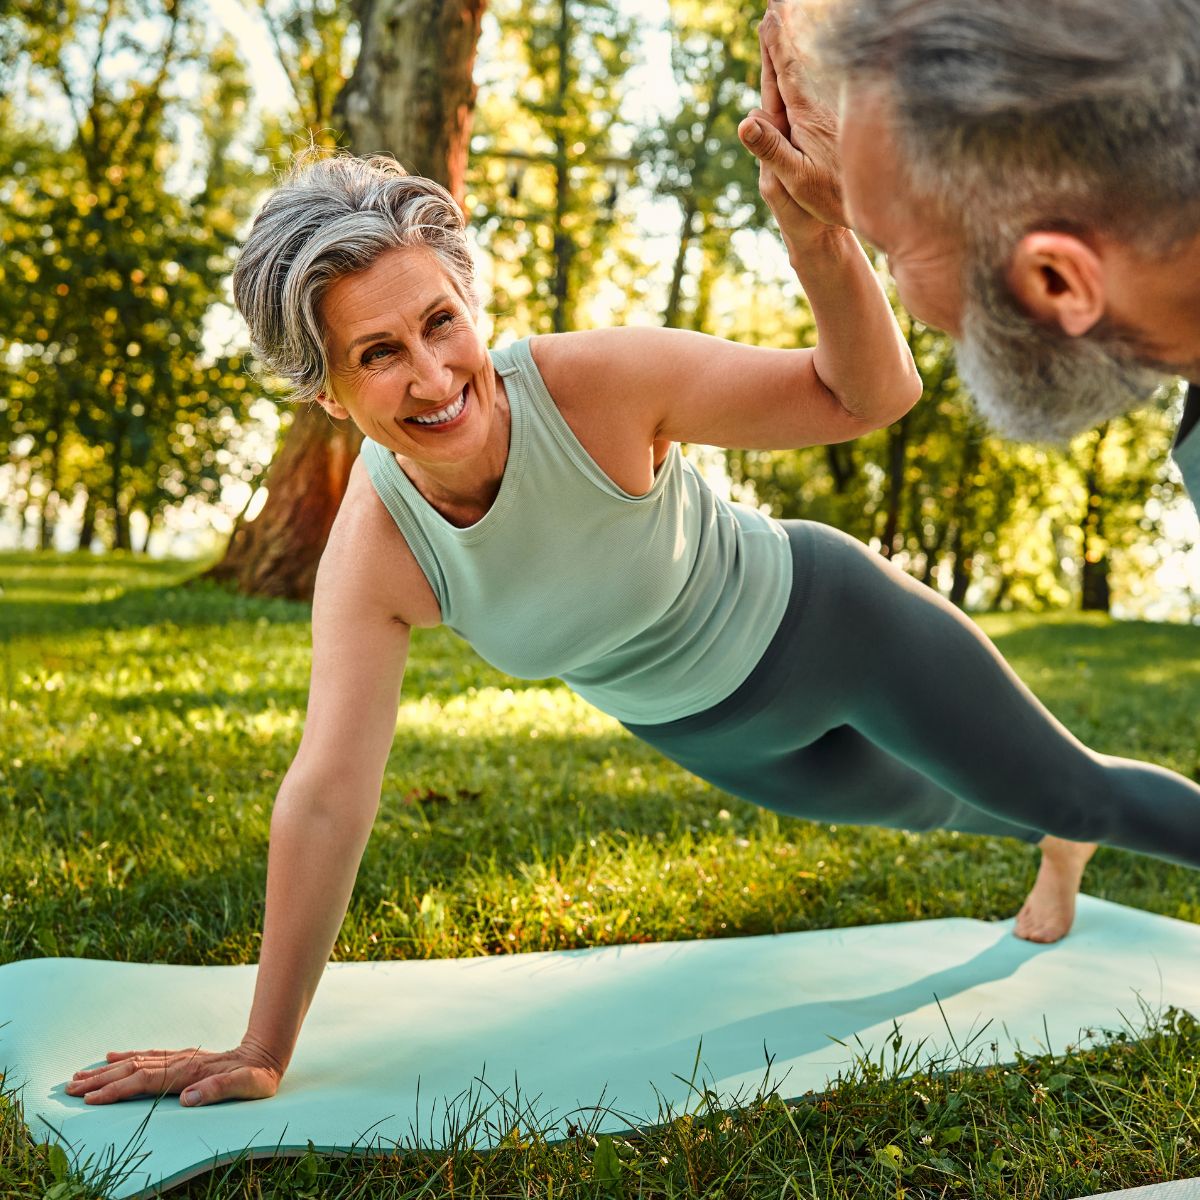 Seated Core and Glute Exercises For Seniors — More Life Health - Seniors  Health & Fitness